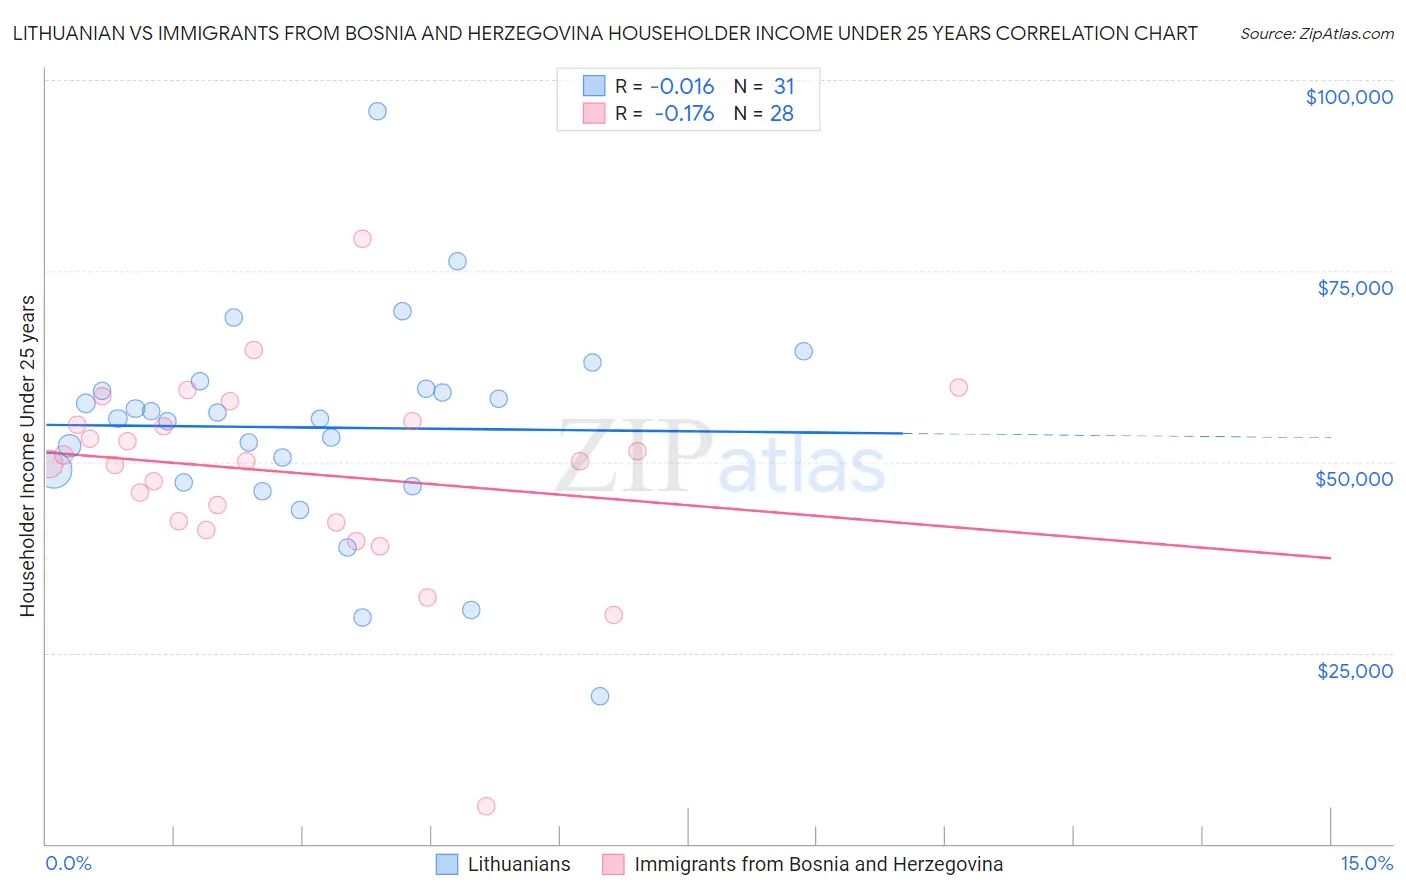 Lithuanian vs Immigrants from Bosnia and Herzegovina Householder Income Under 25 years